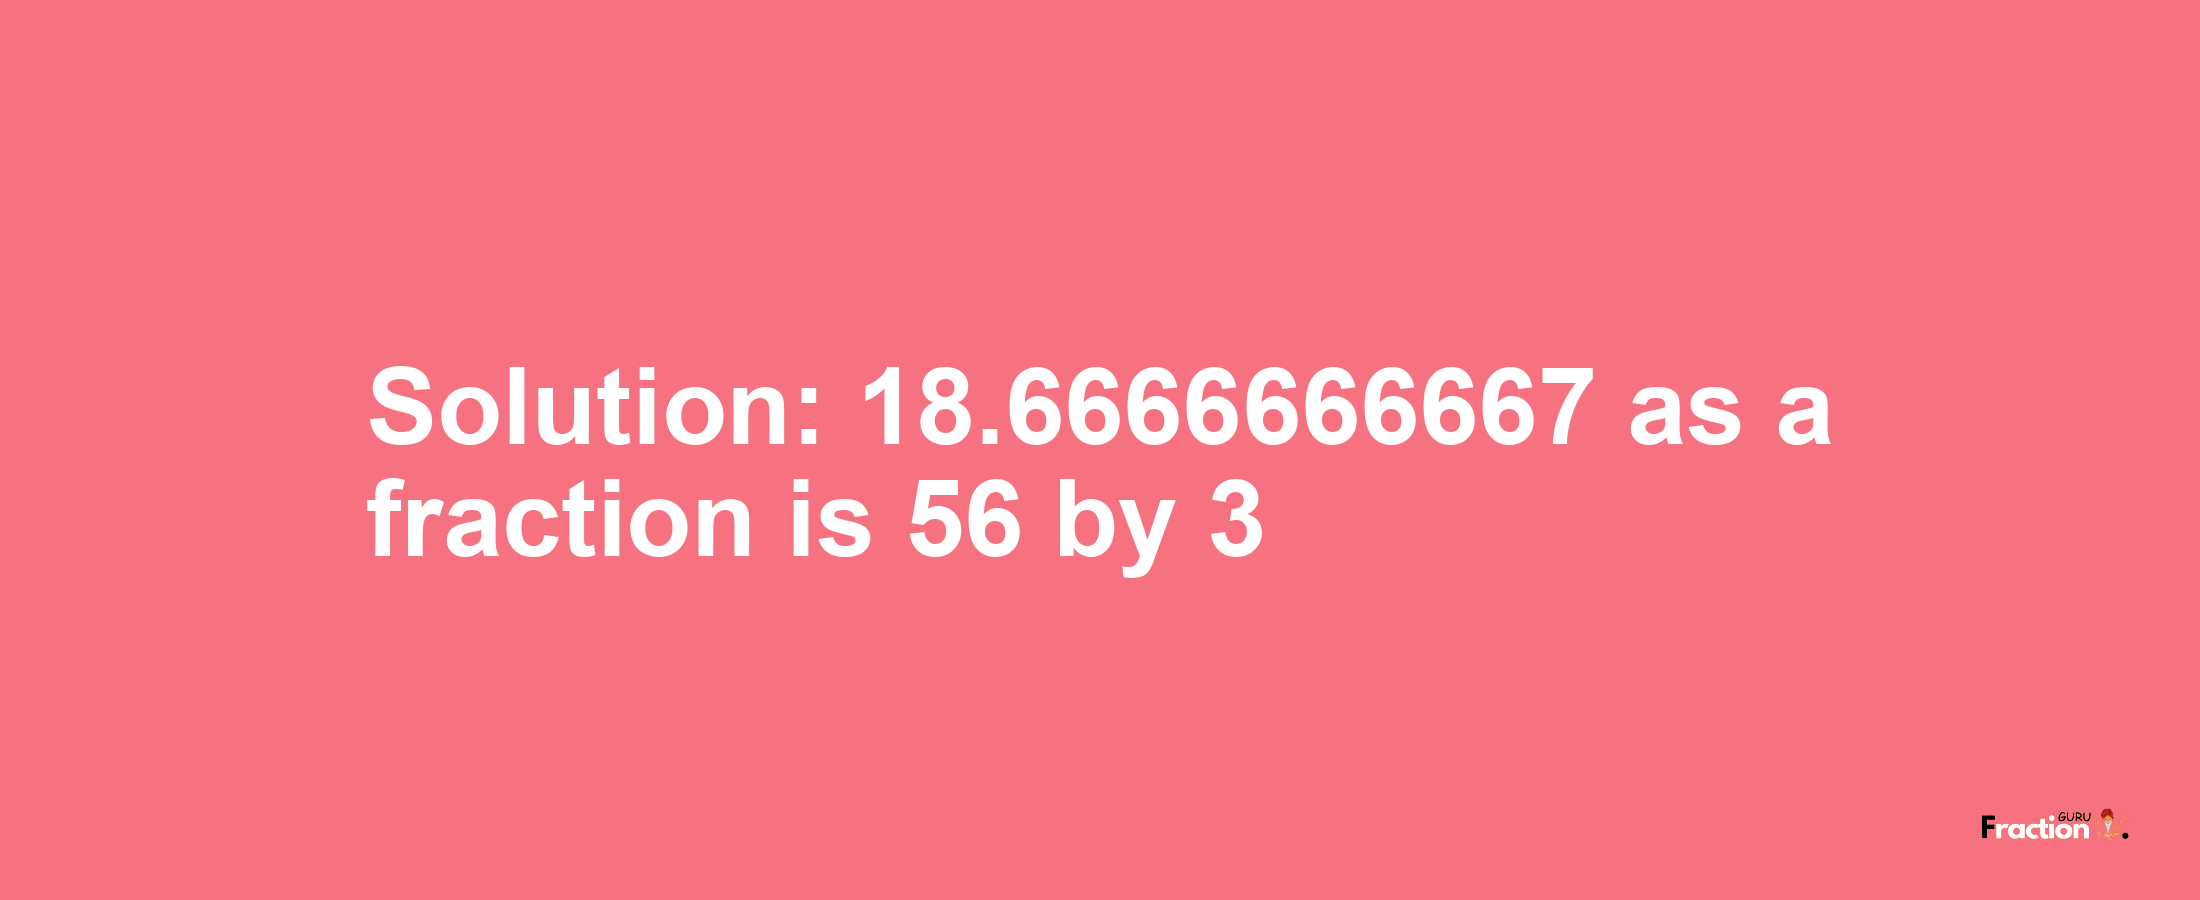 Solution:18.6666666667 as a fraction is 56/3